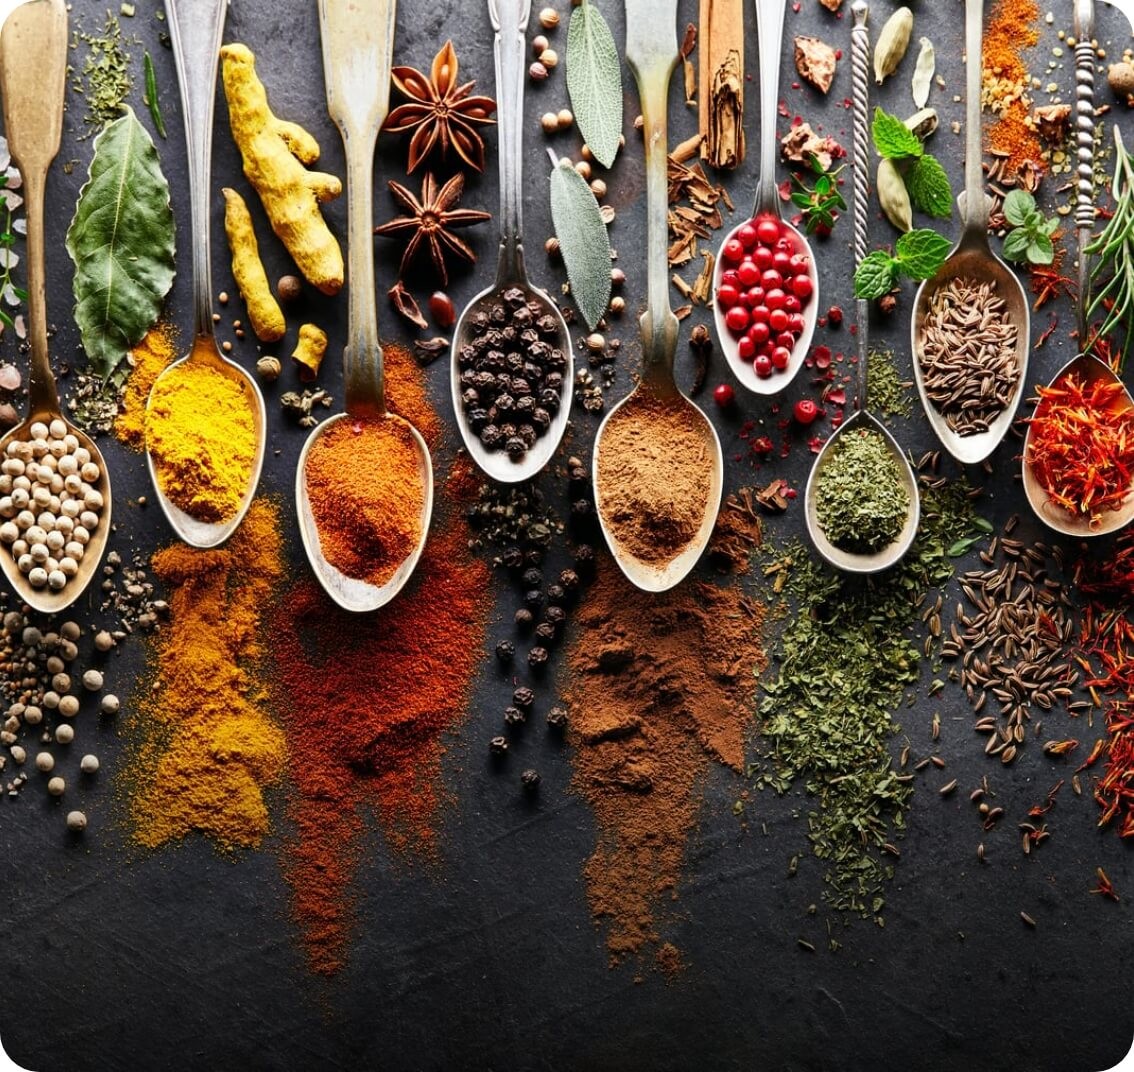 11 herbs and spices for your health